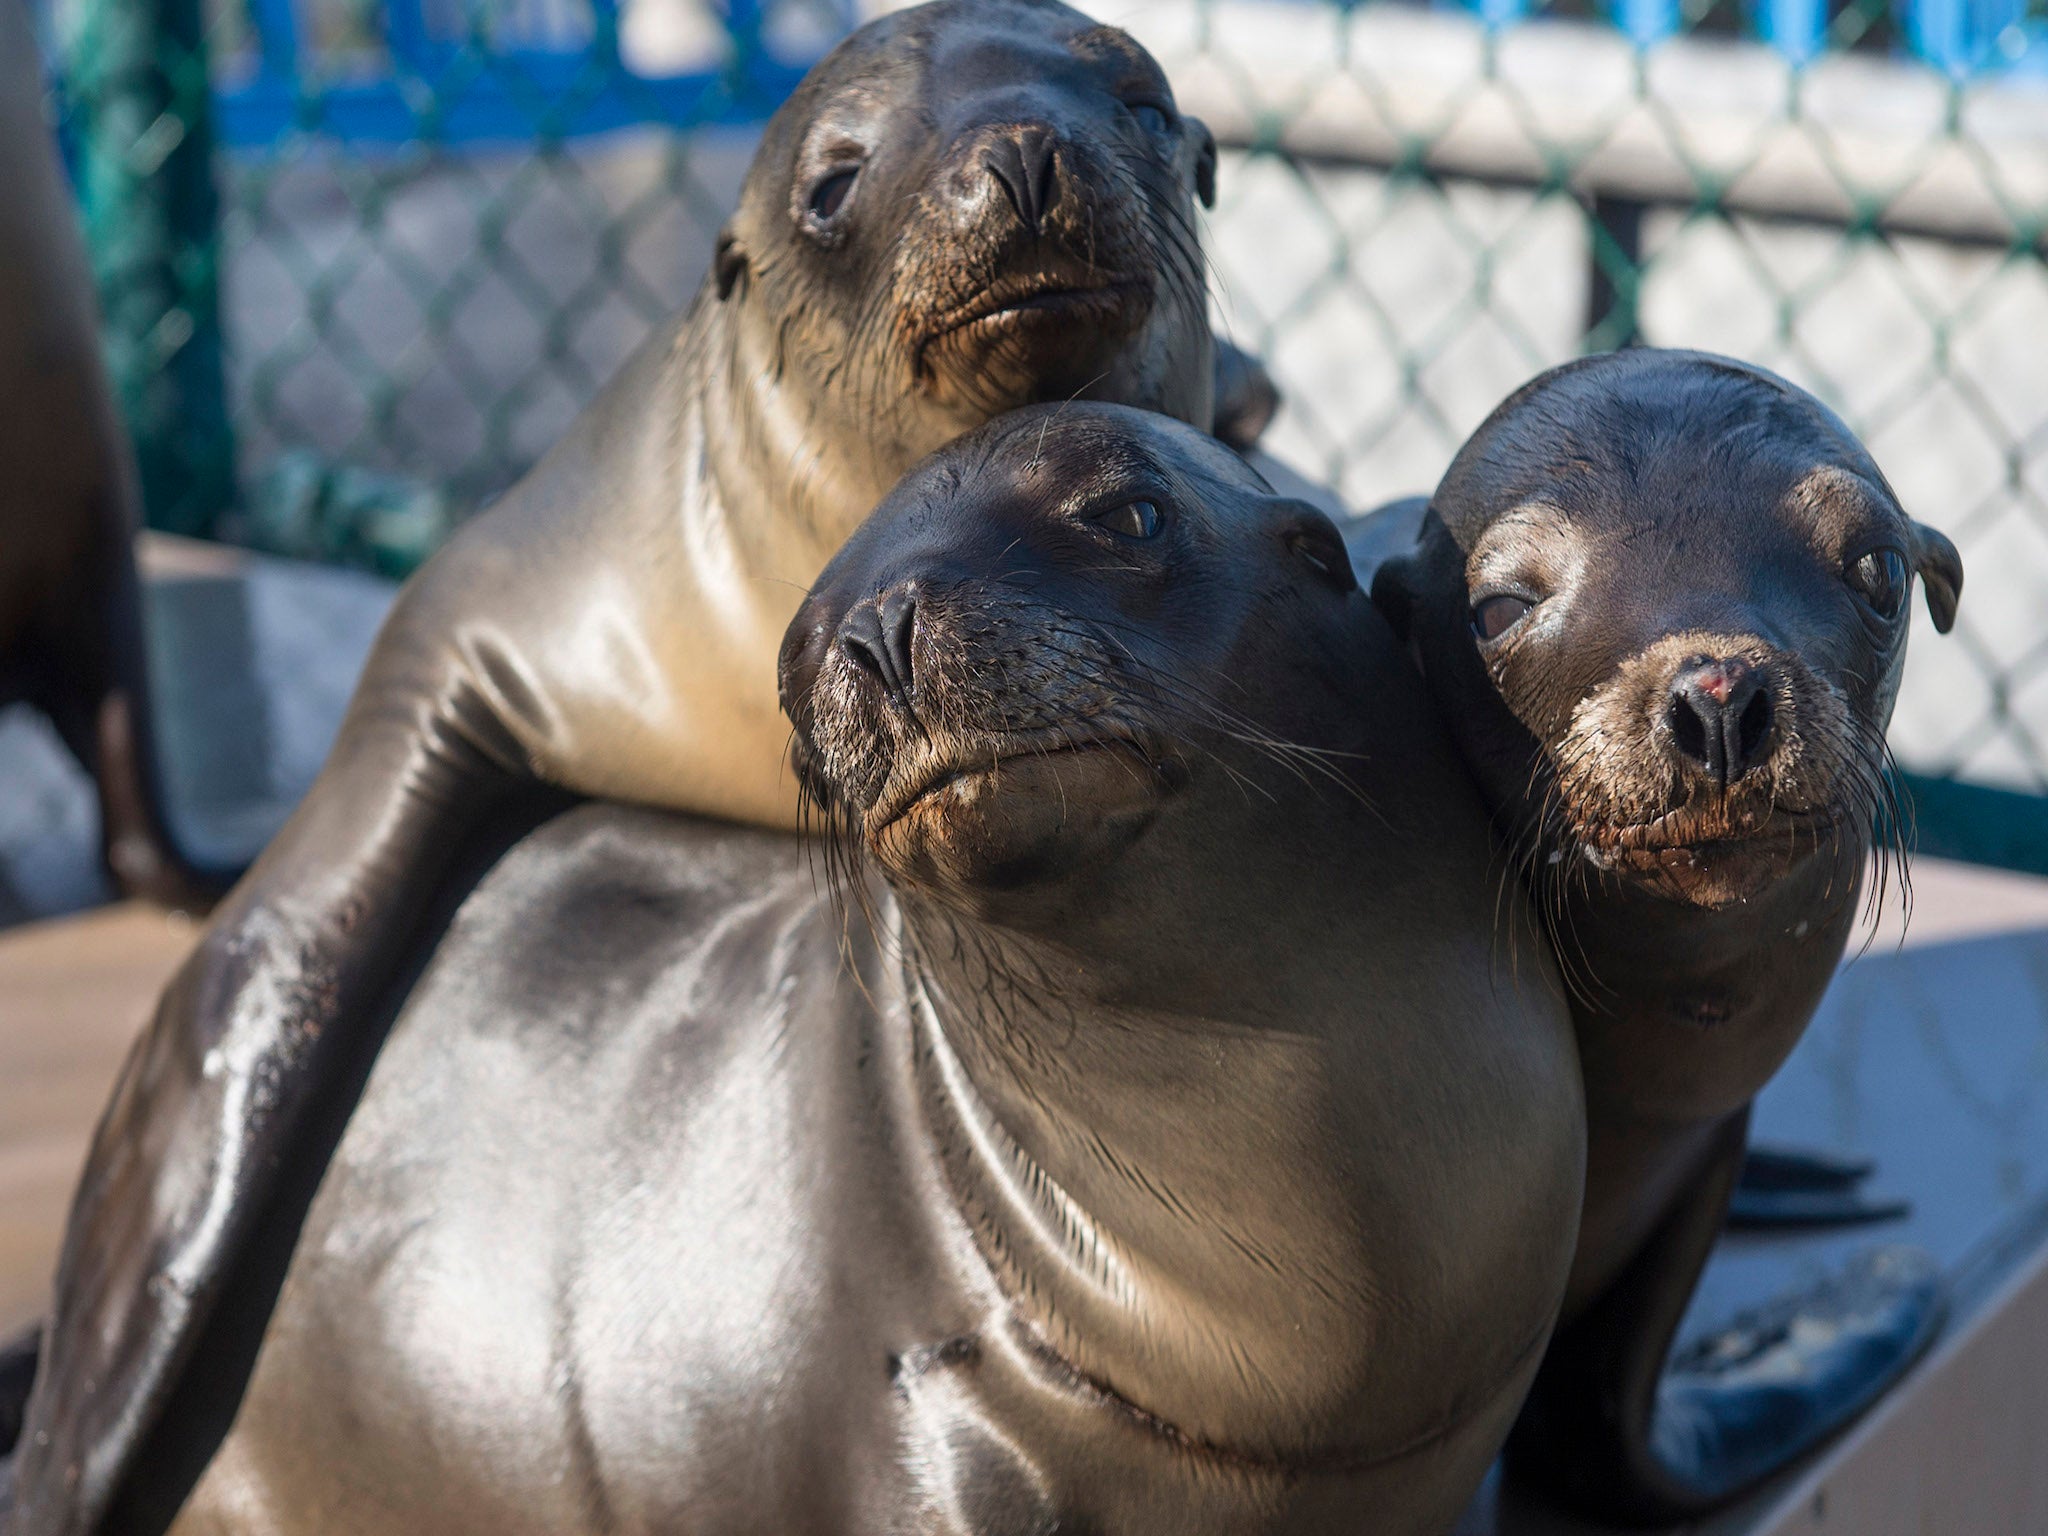 A California sea lion reportedly pulled an angler undwater